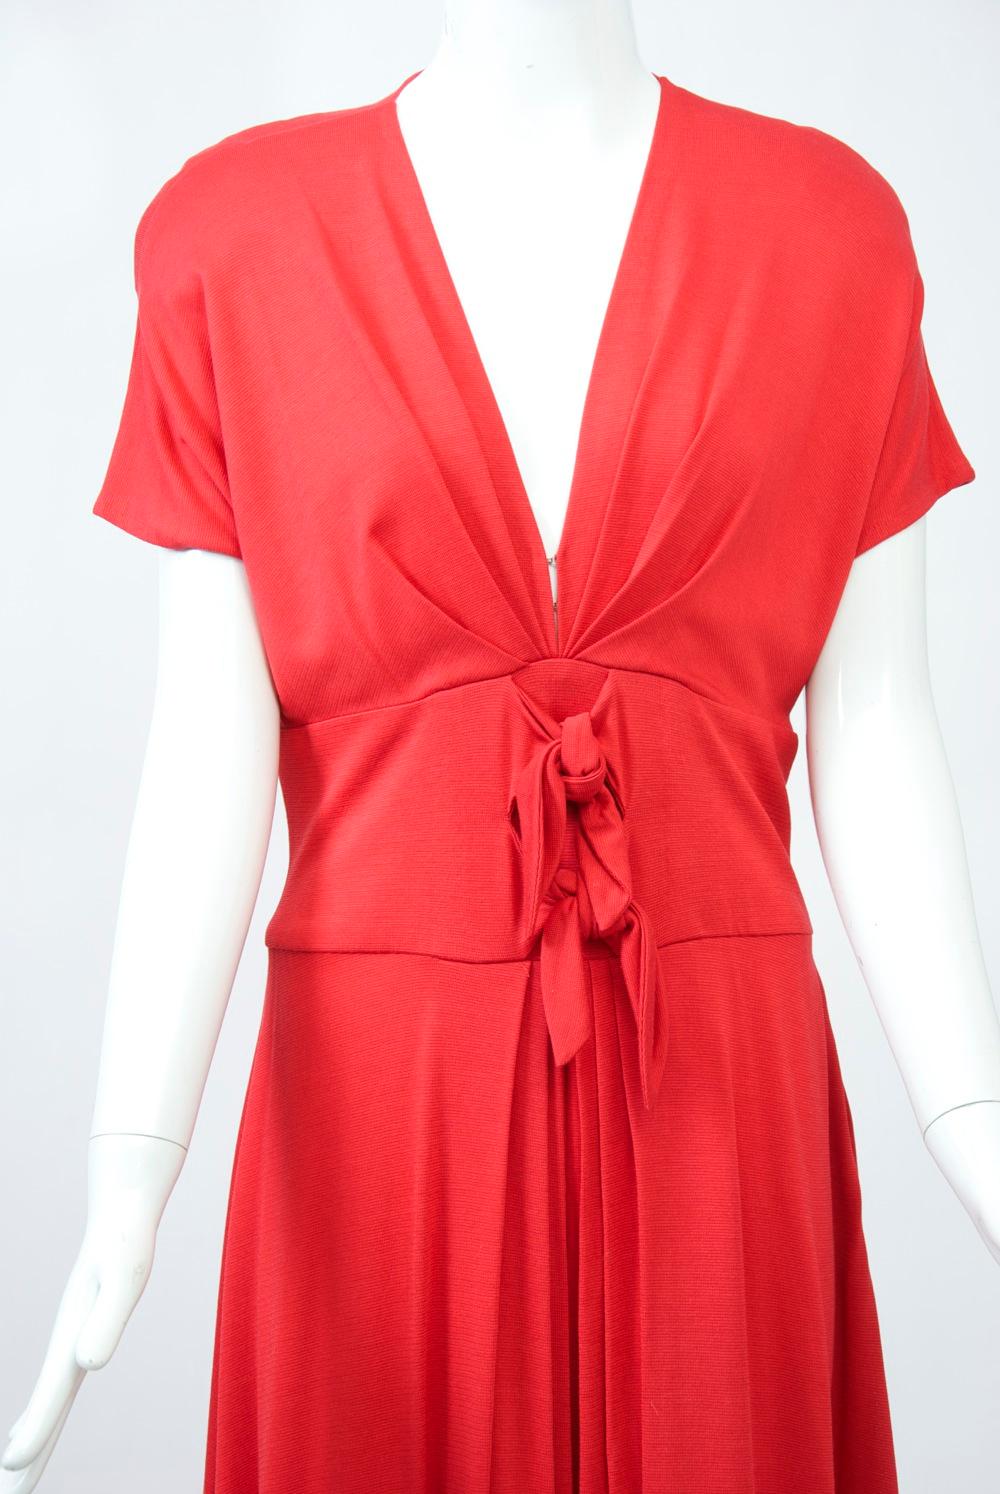 Kathryn Dianos long red dress in a rayon and nylon blend fabric featuring a set-in midriff with two ties, a deepv neckline and raglan cap sleeves. The bodice has tucked pleats at the V, which complement the inverted pleats below the midriff in